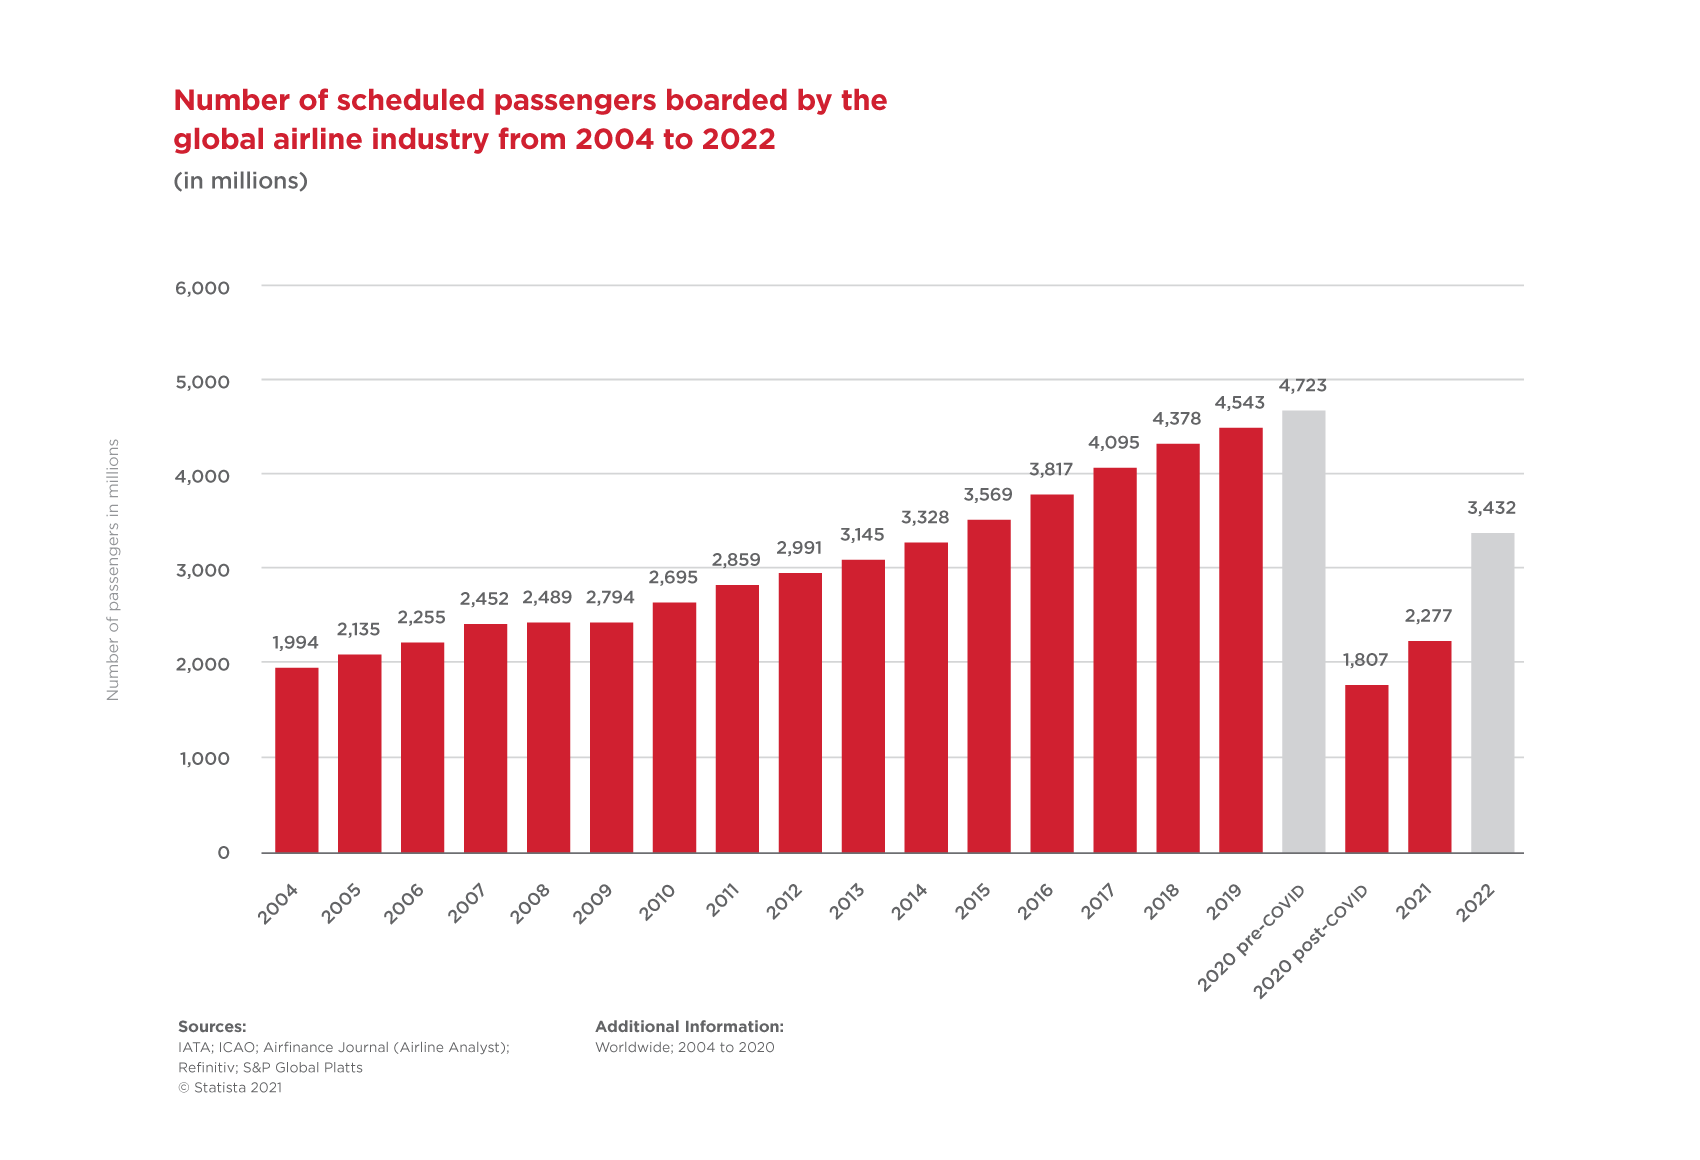 Number of scheduled passengers by global airline industry 2004 - 2022 in millions